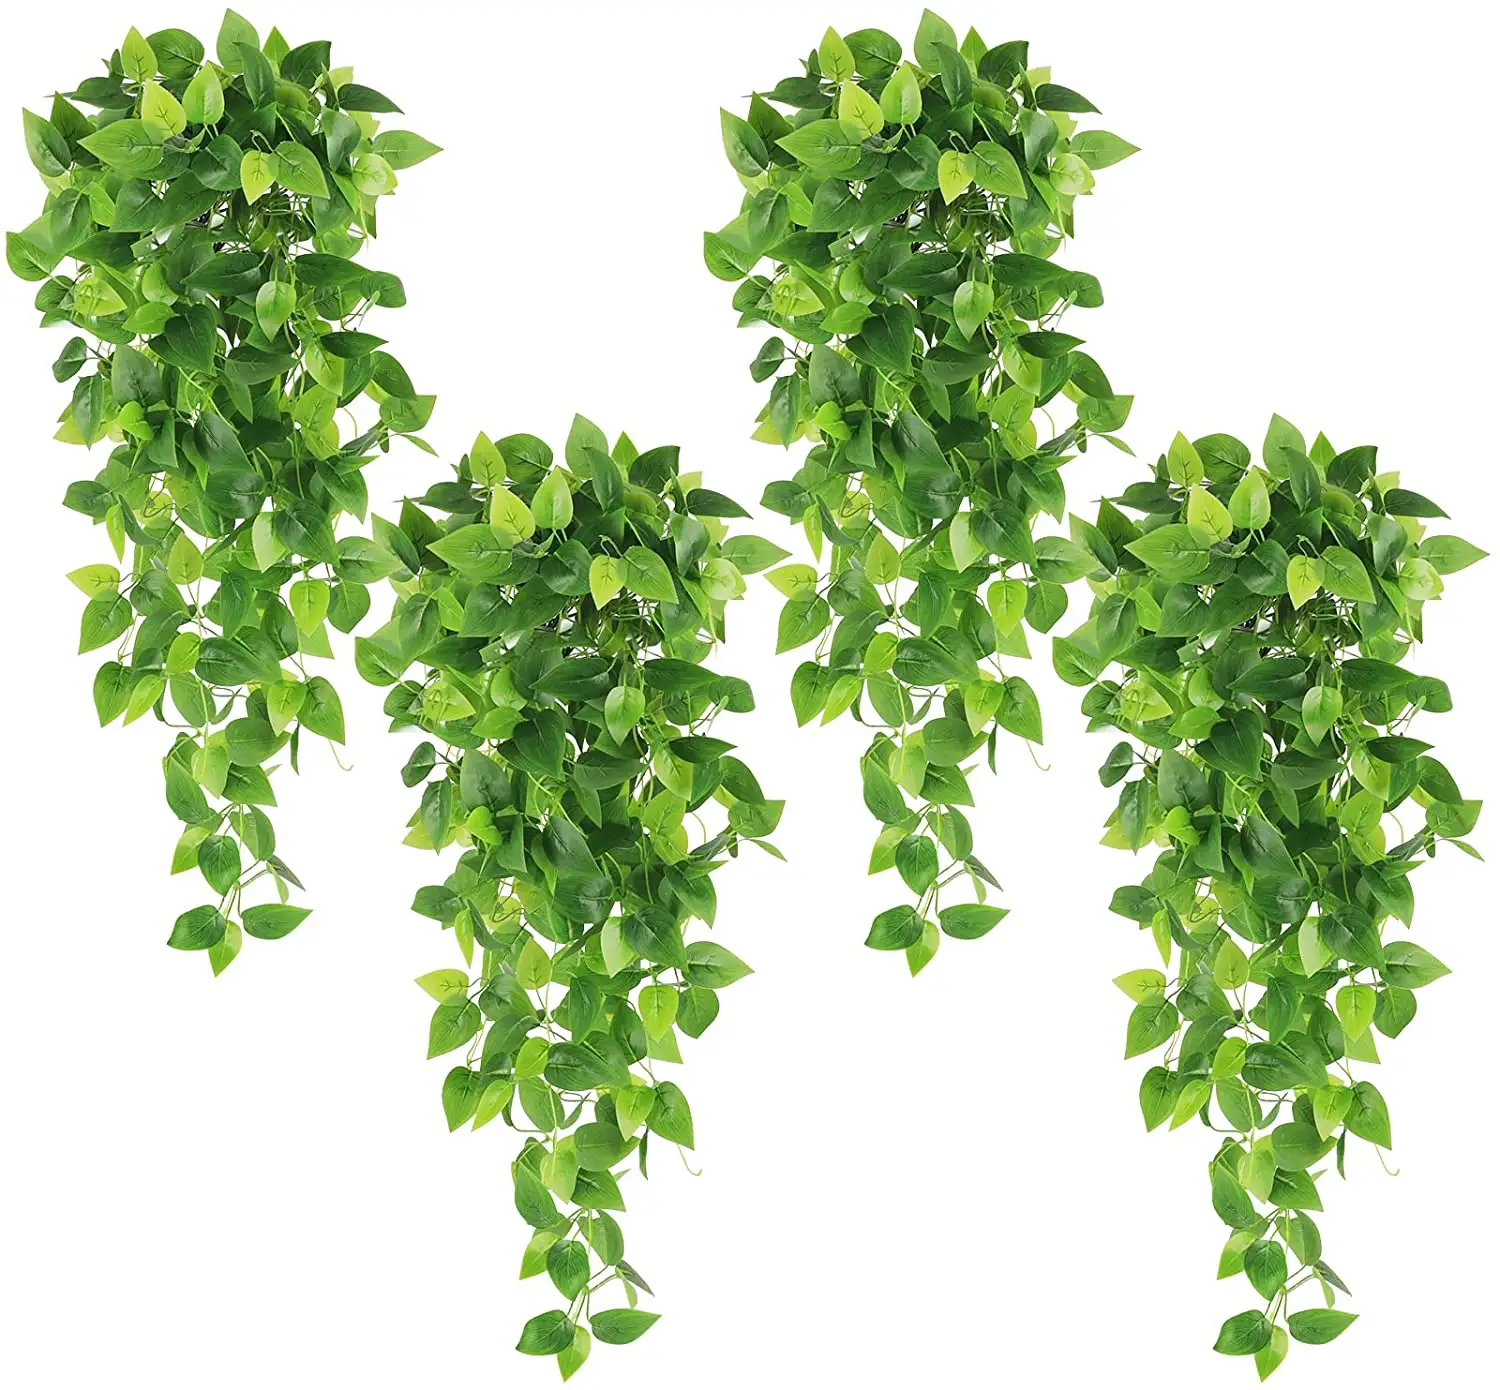 Artificial Hanging Ivy Plants Faux Vine Ivy Leaves Garland for Wedding Party Home Decoration